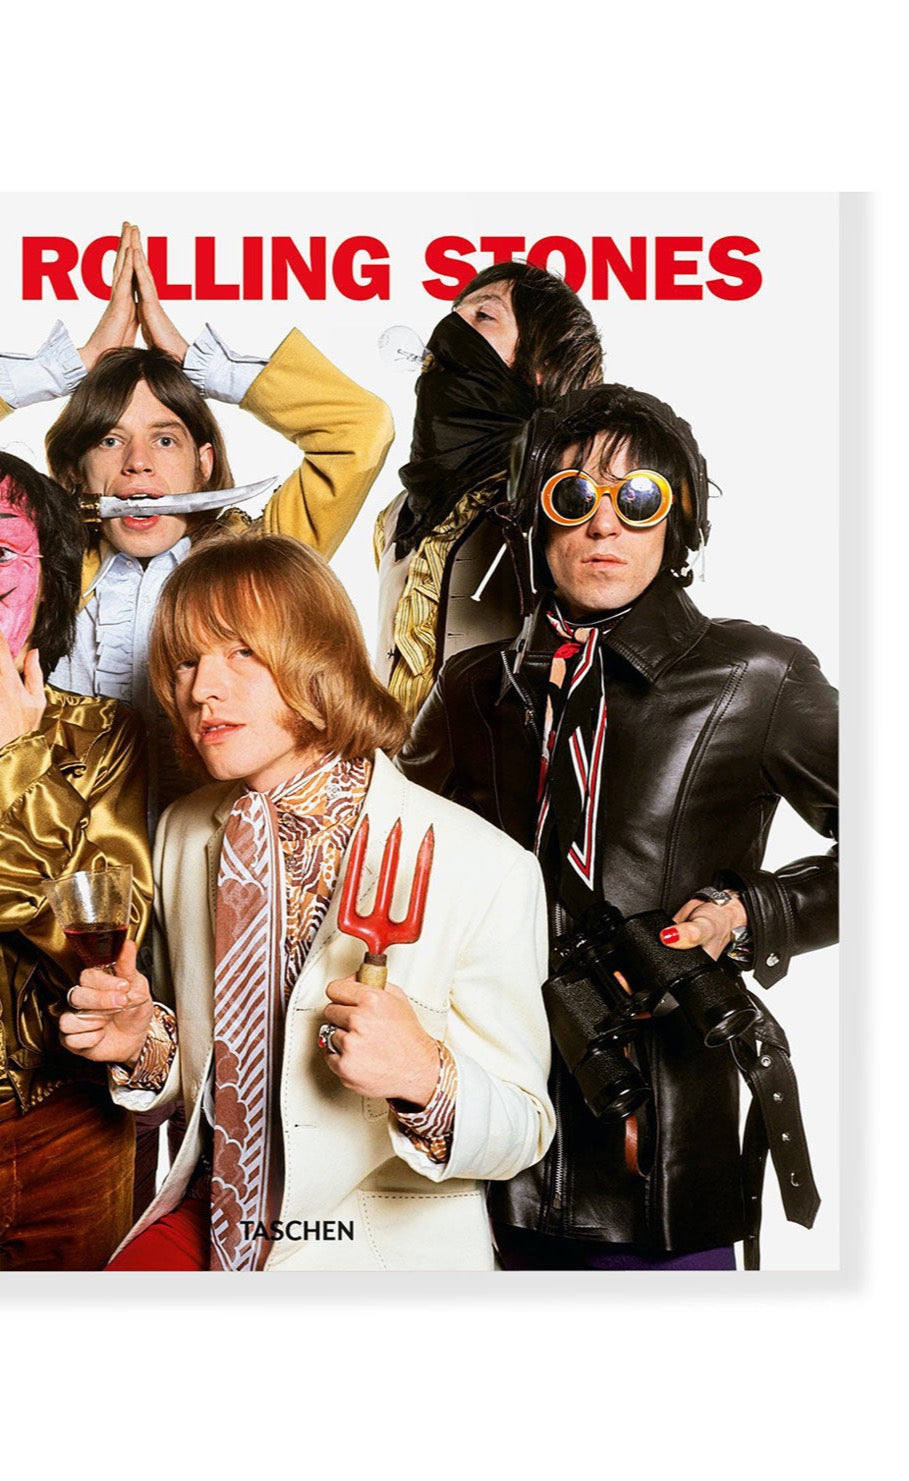 Book | The Rolling Stones. Updated Edition